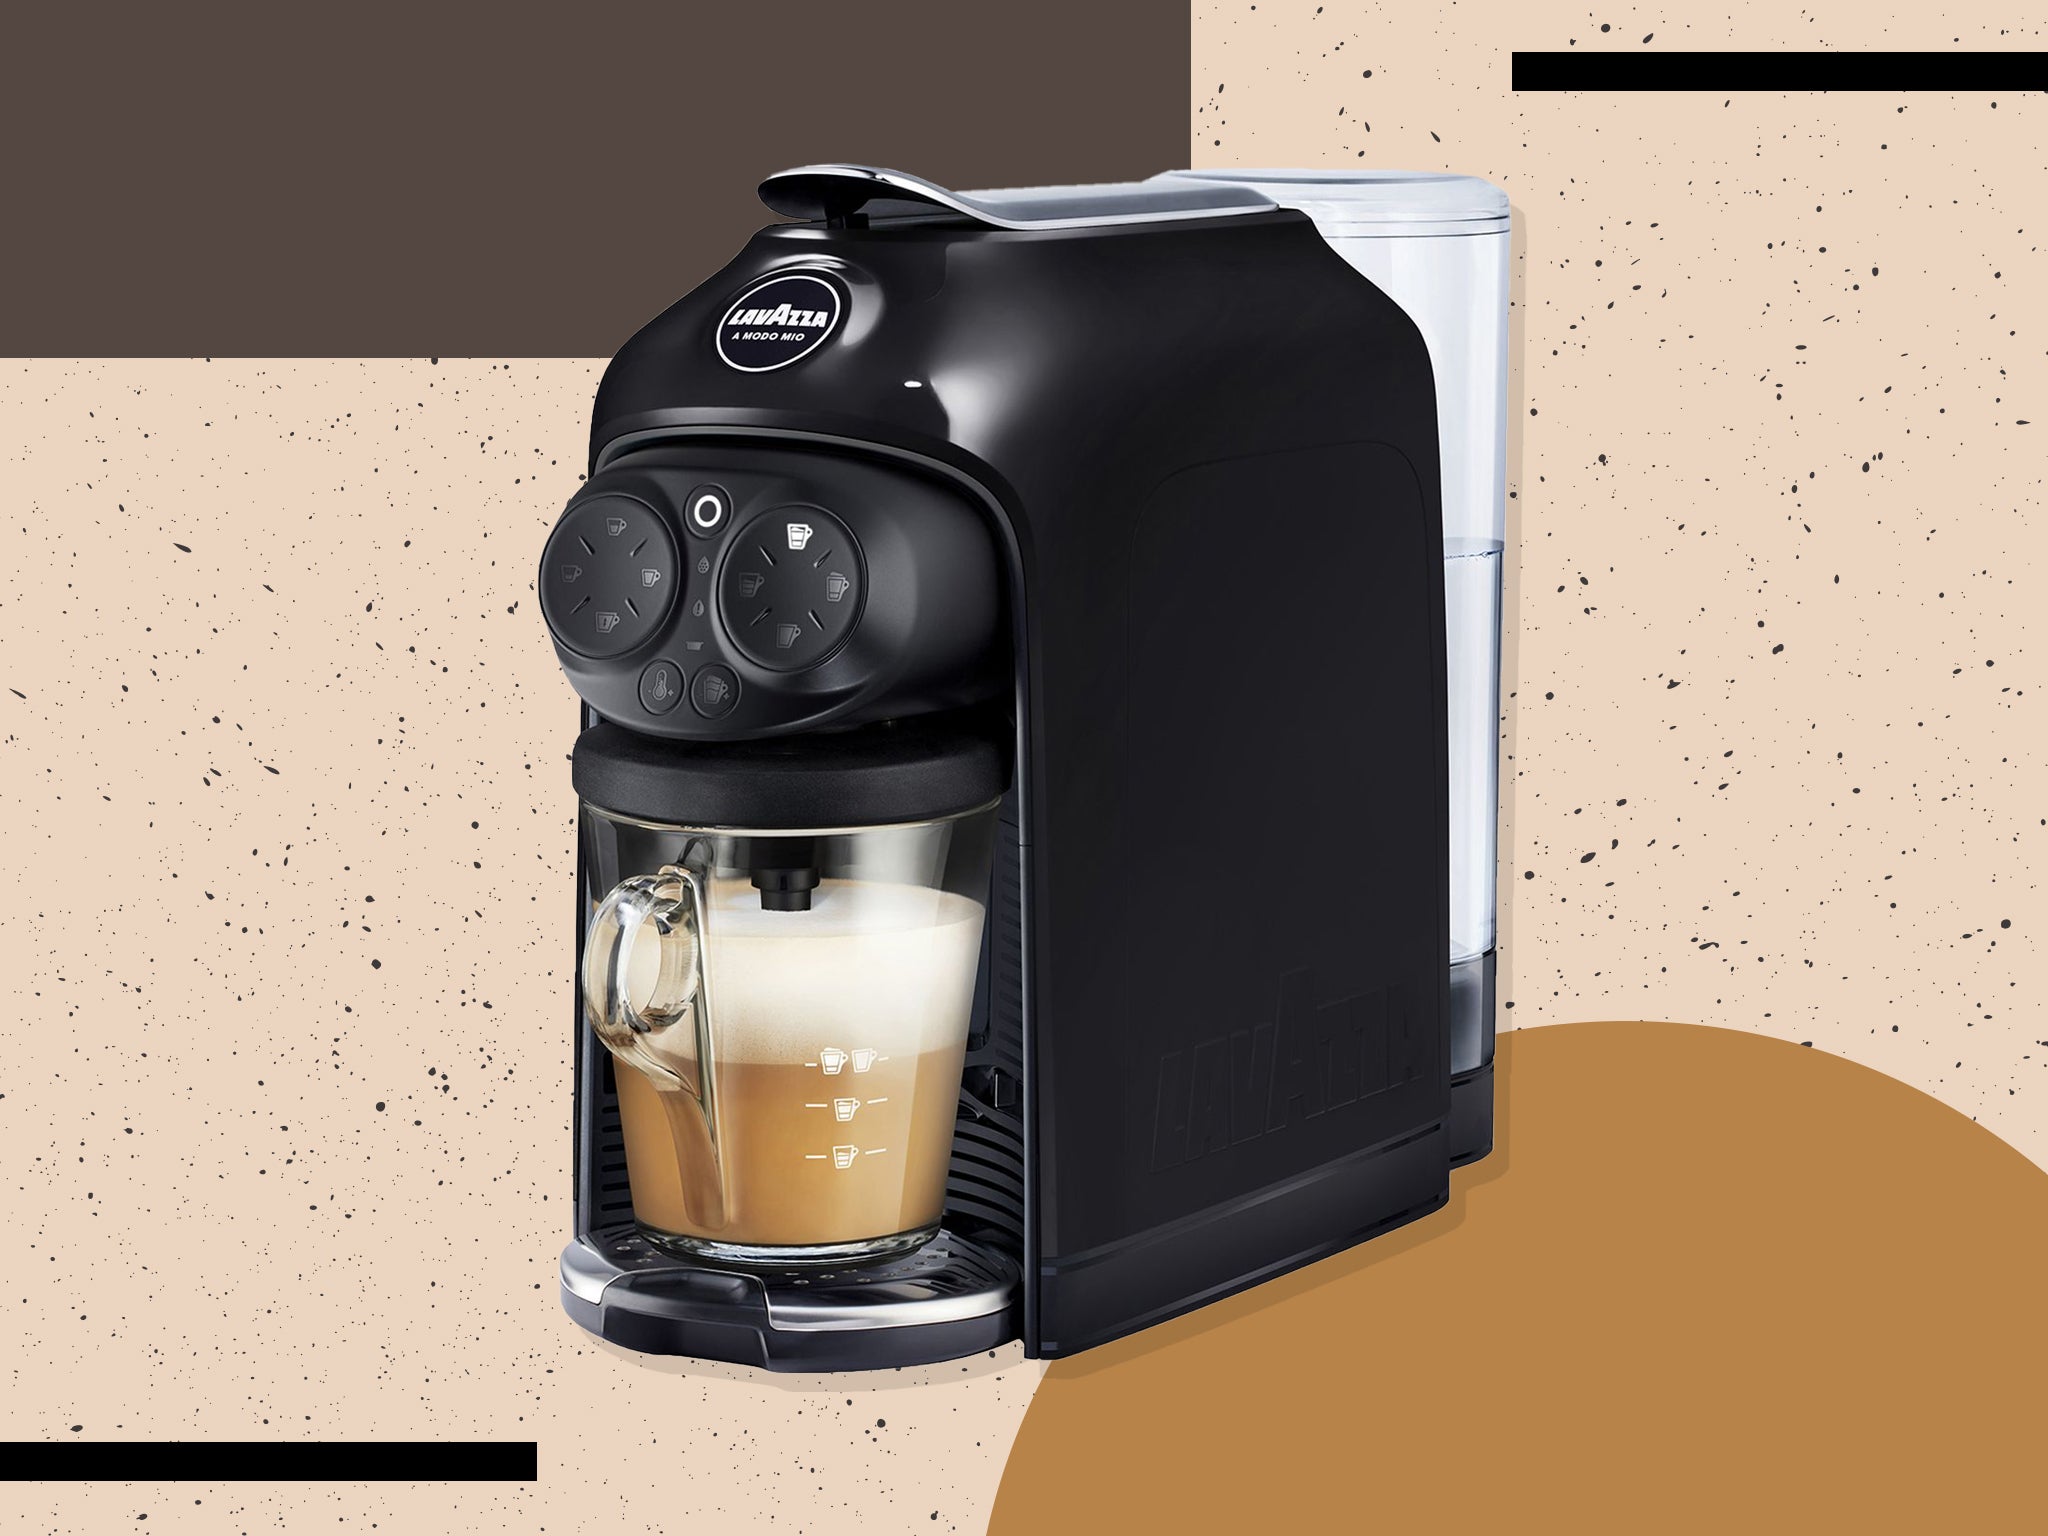 Lavazza deséa coffee machine review: We put the pod model to the